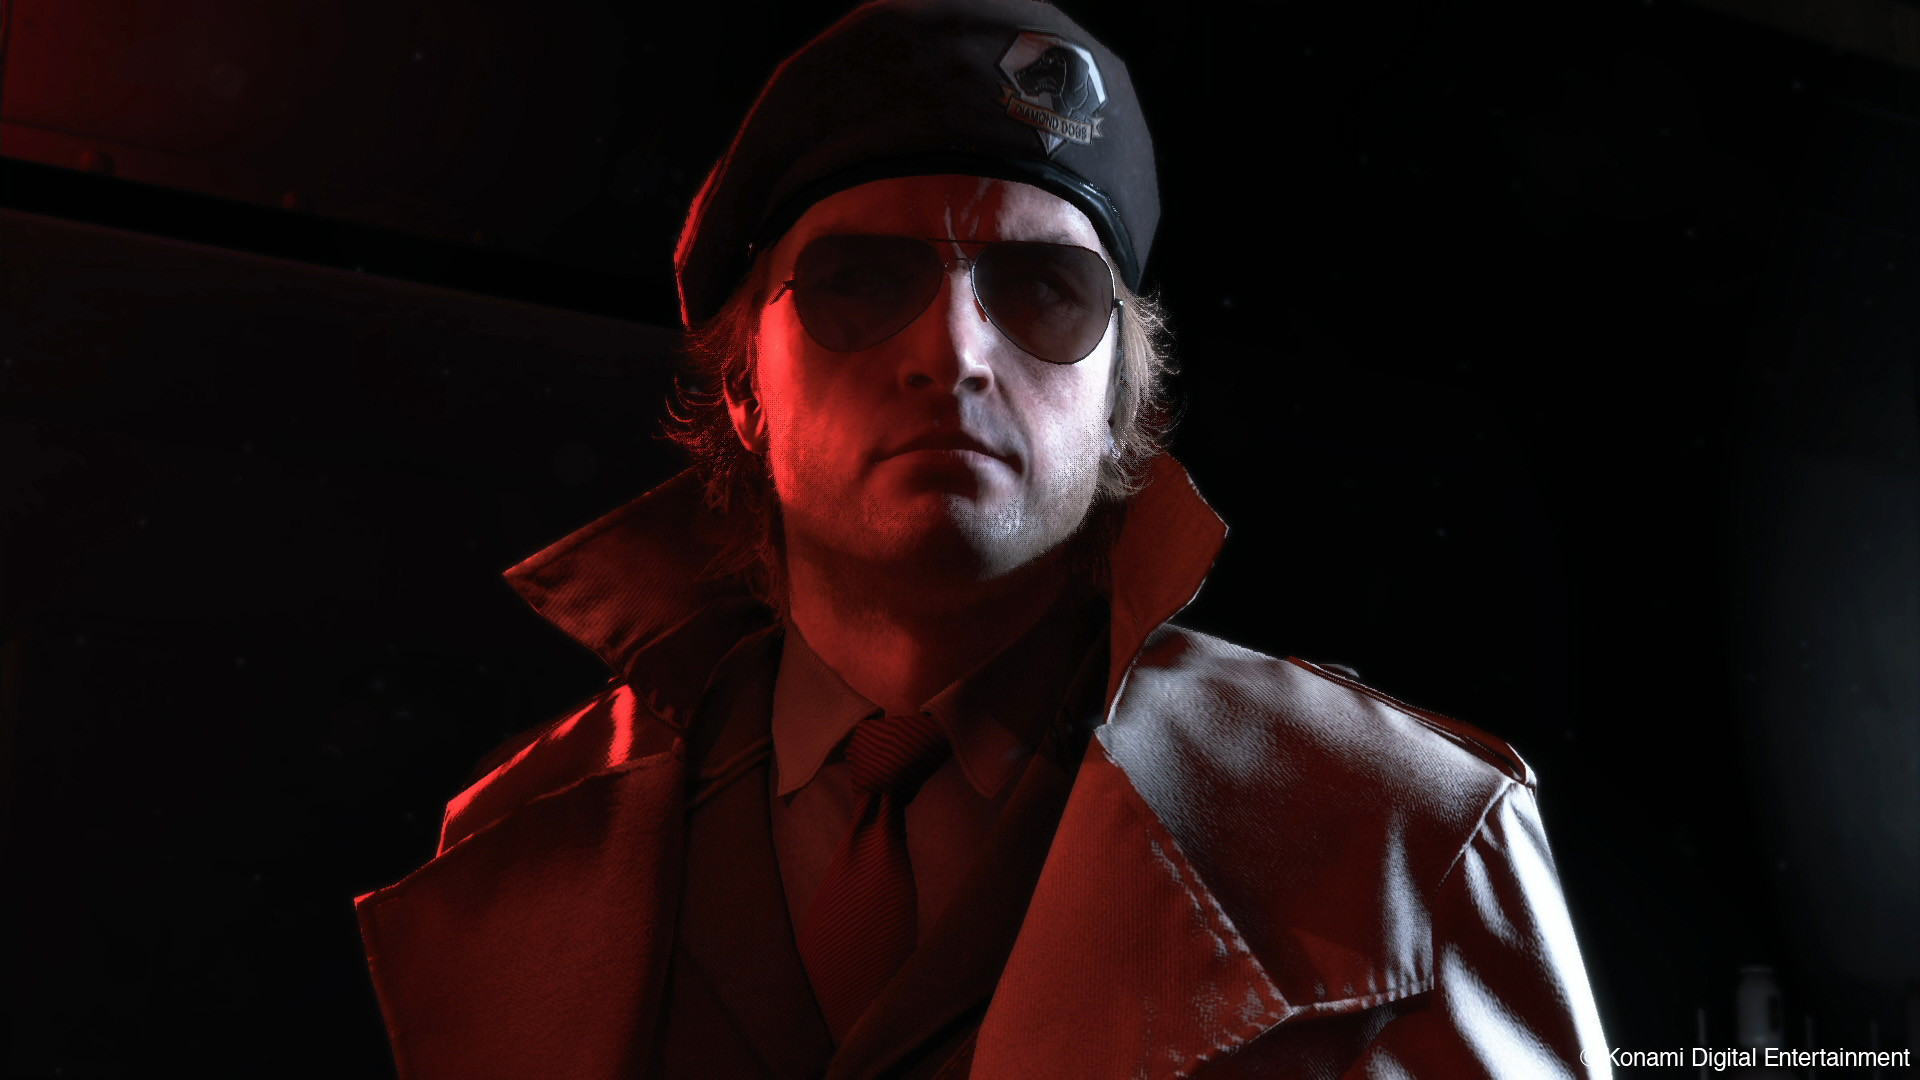 1920x1080 Roy Campbell leads Diamond Dogs - Metal Gear Solid V: The Phantom Pain  Message Board for PlayStation 4 - GameFAQs